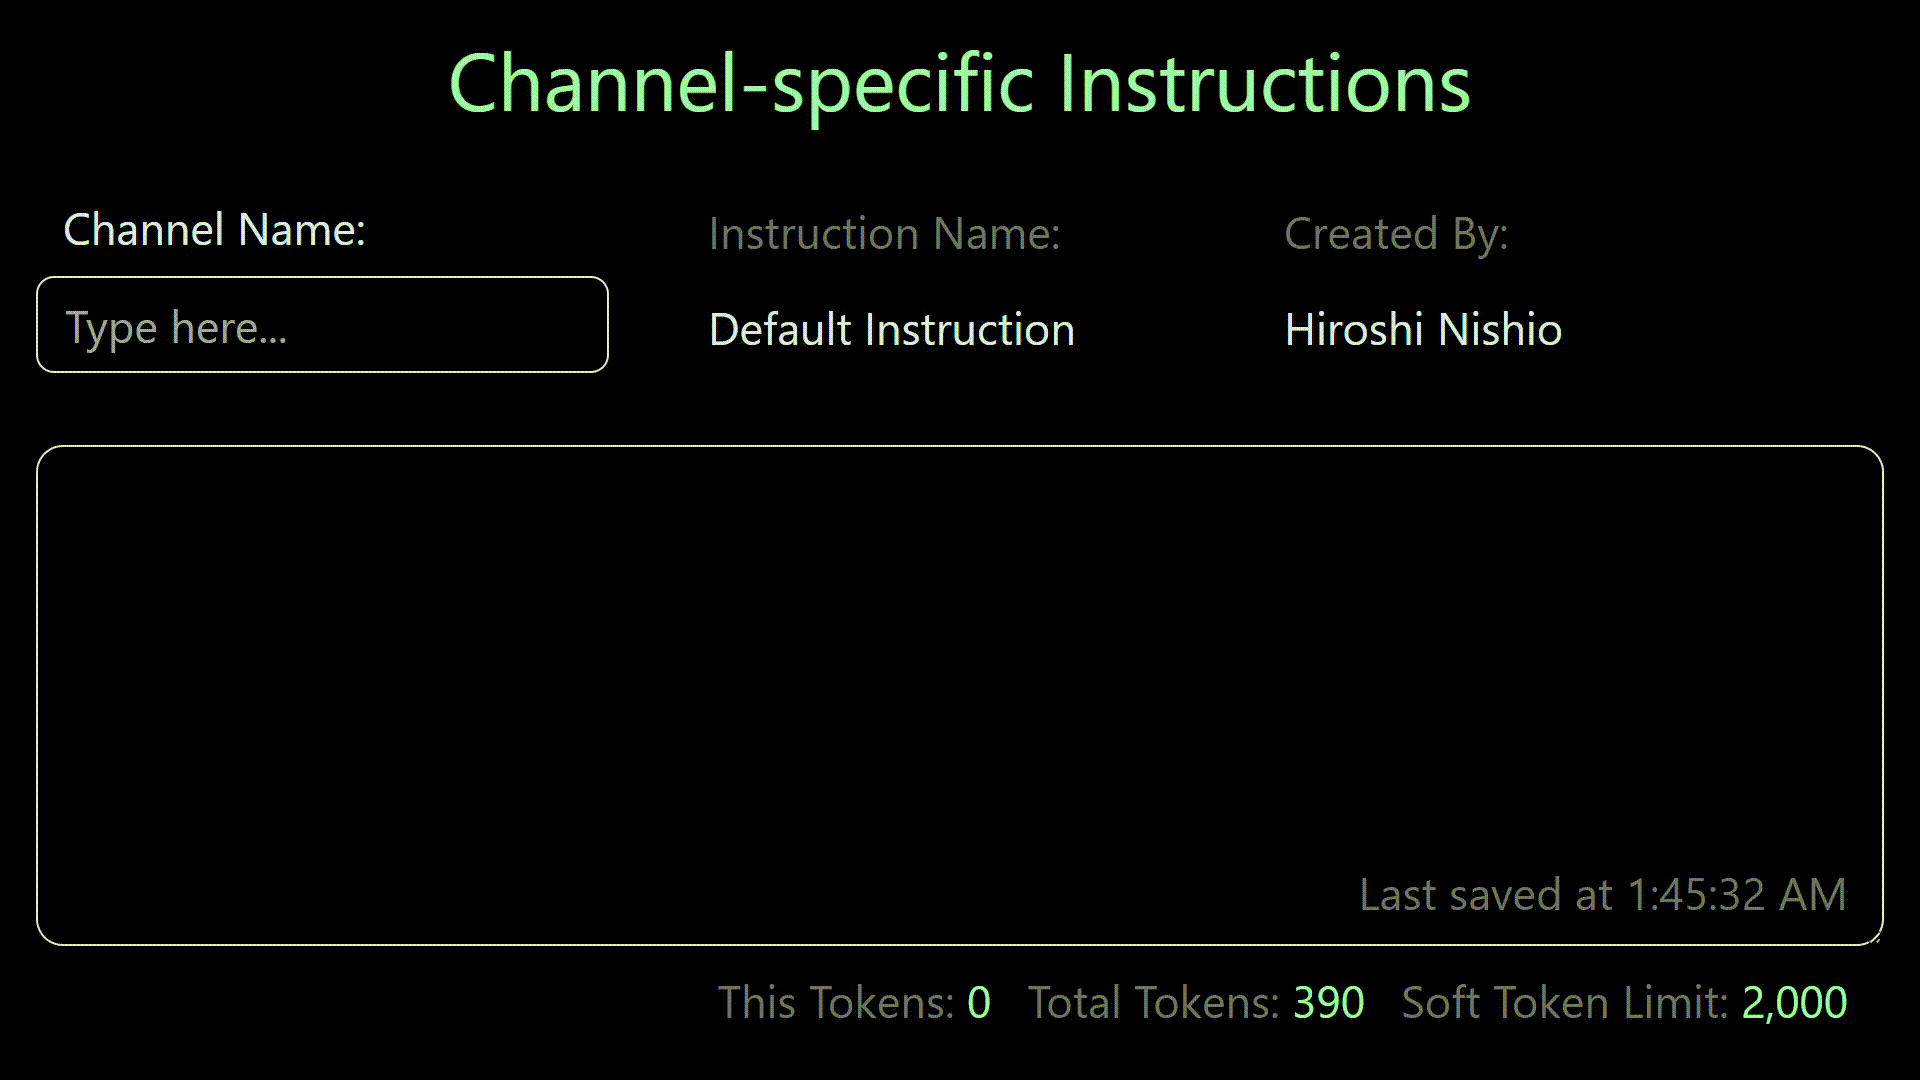 Channel-specific Instruction